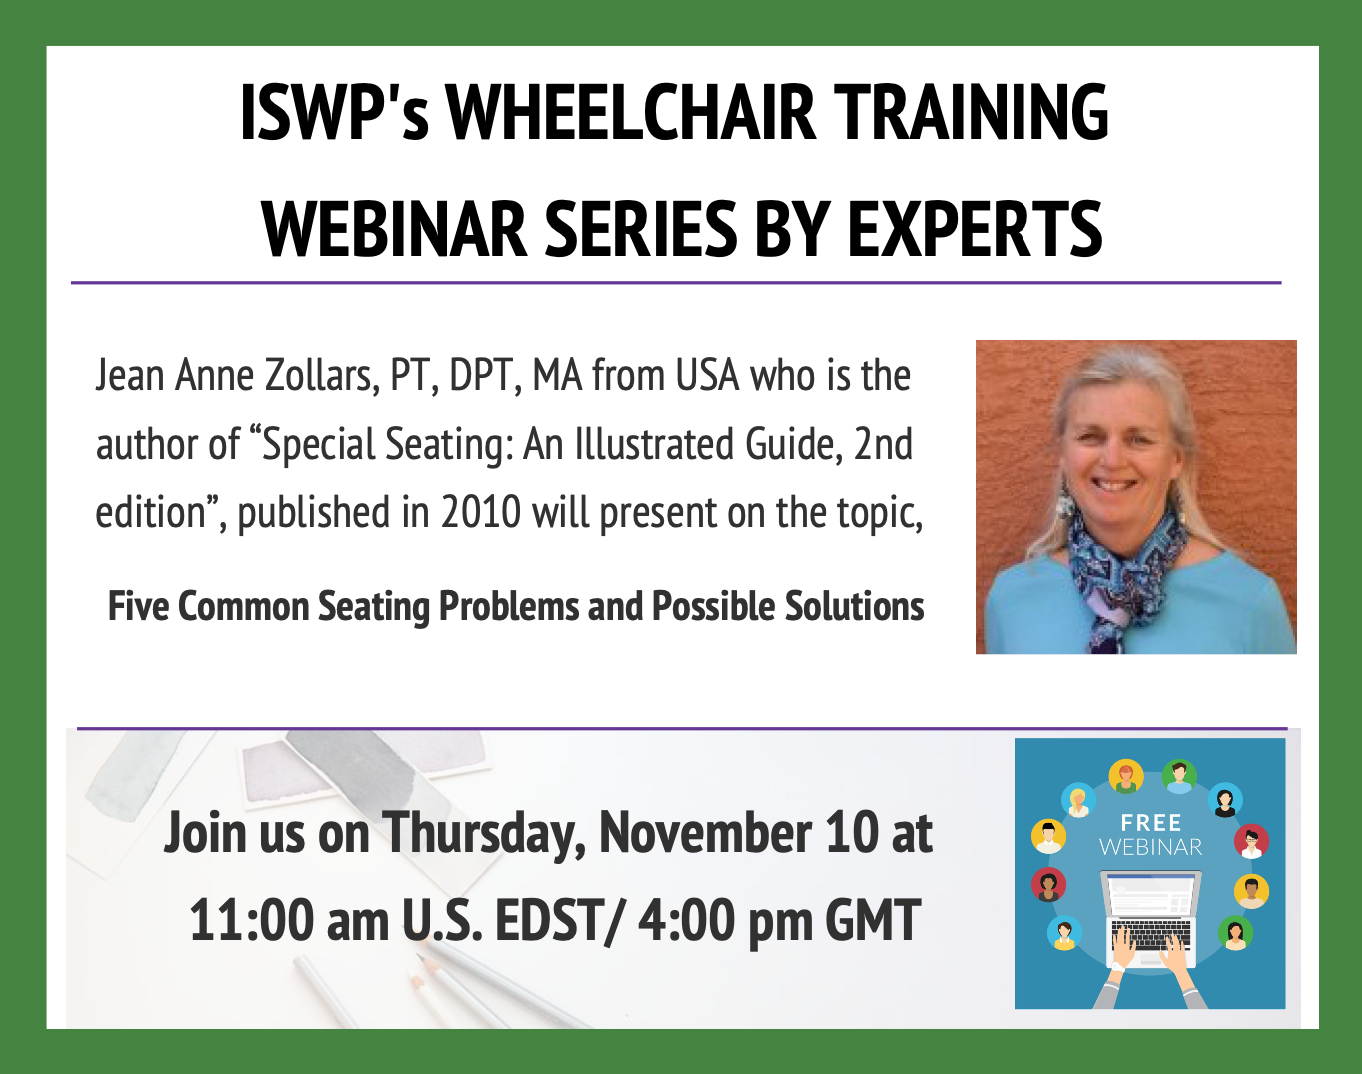 ISWP's wheelchair training webinar series by experts banner